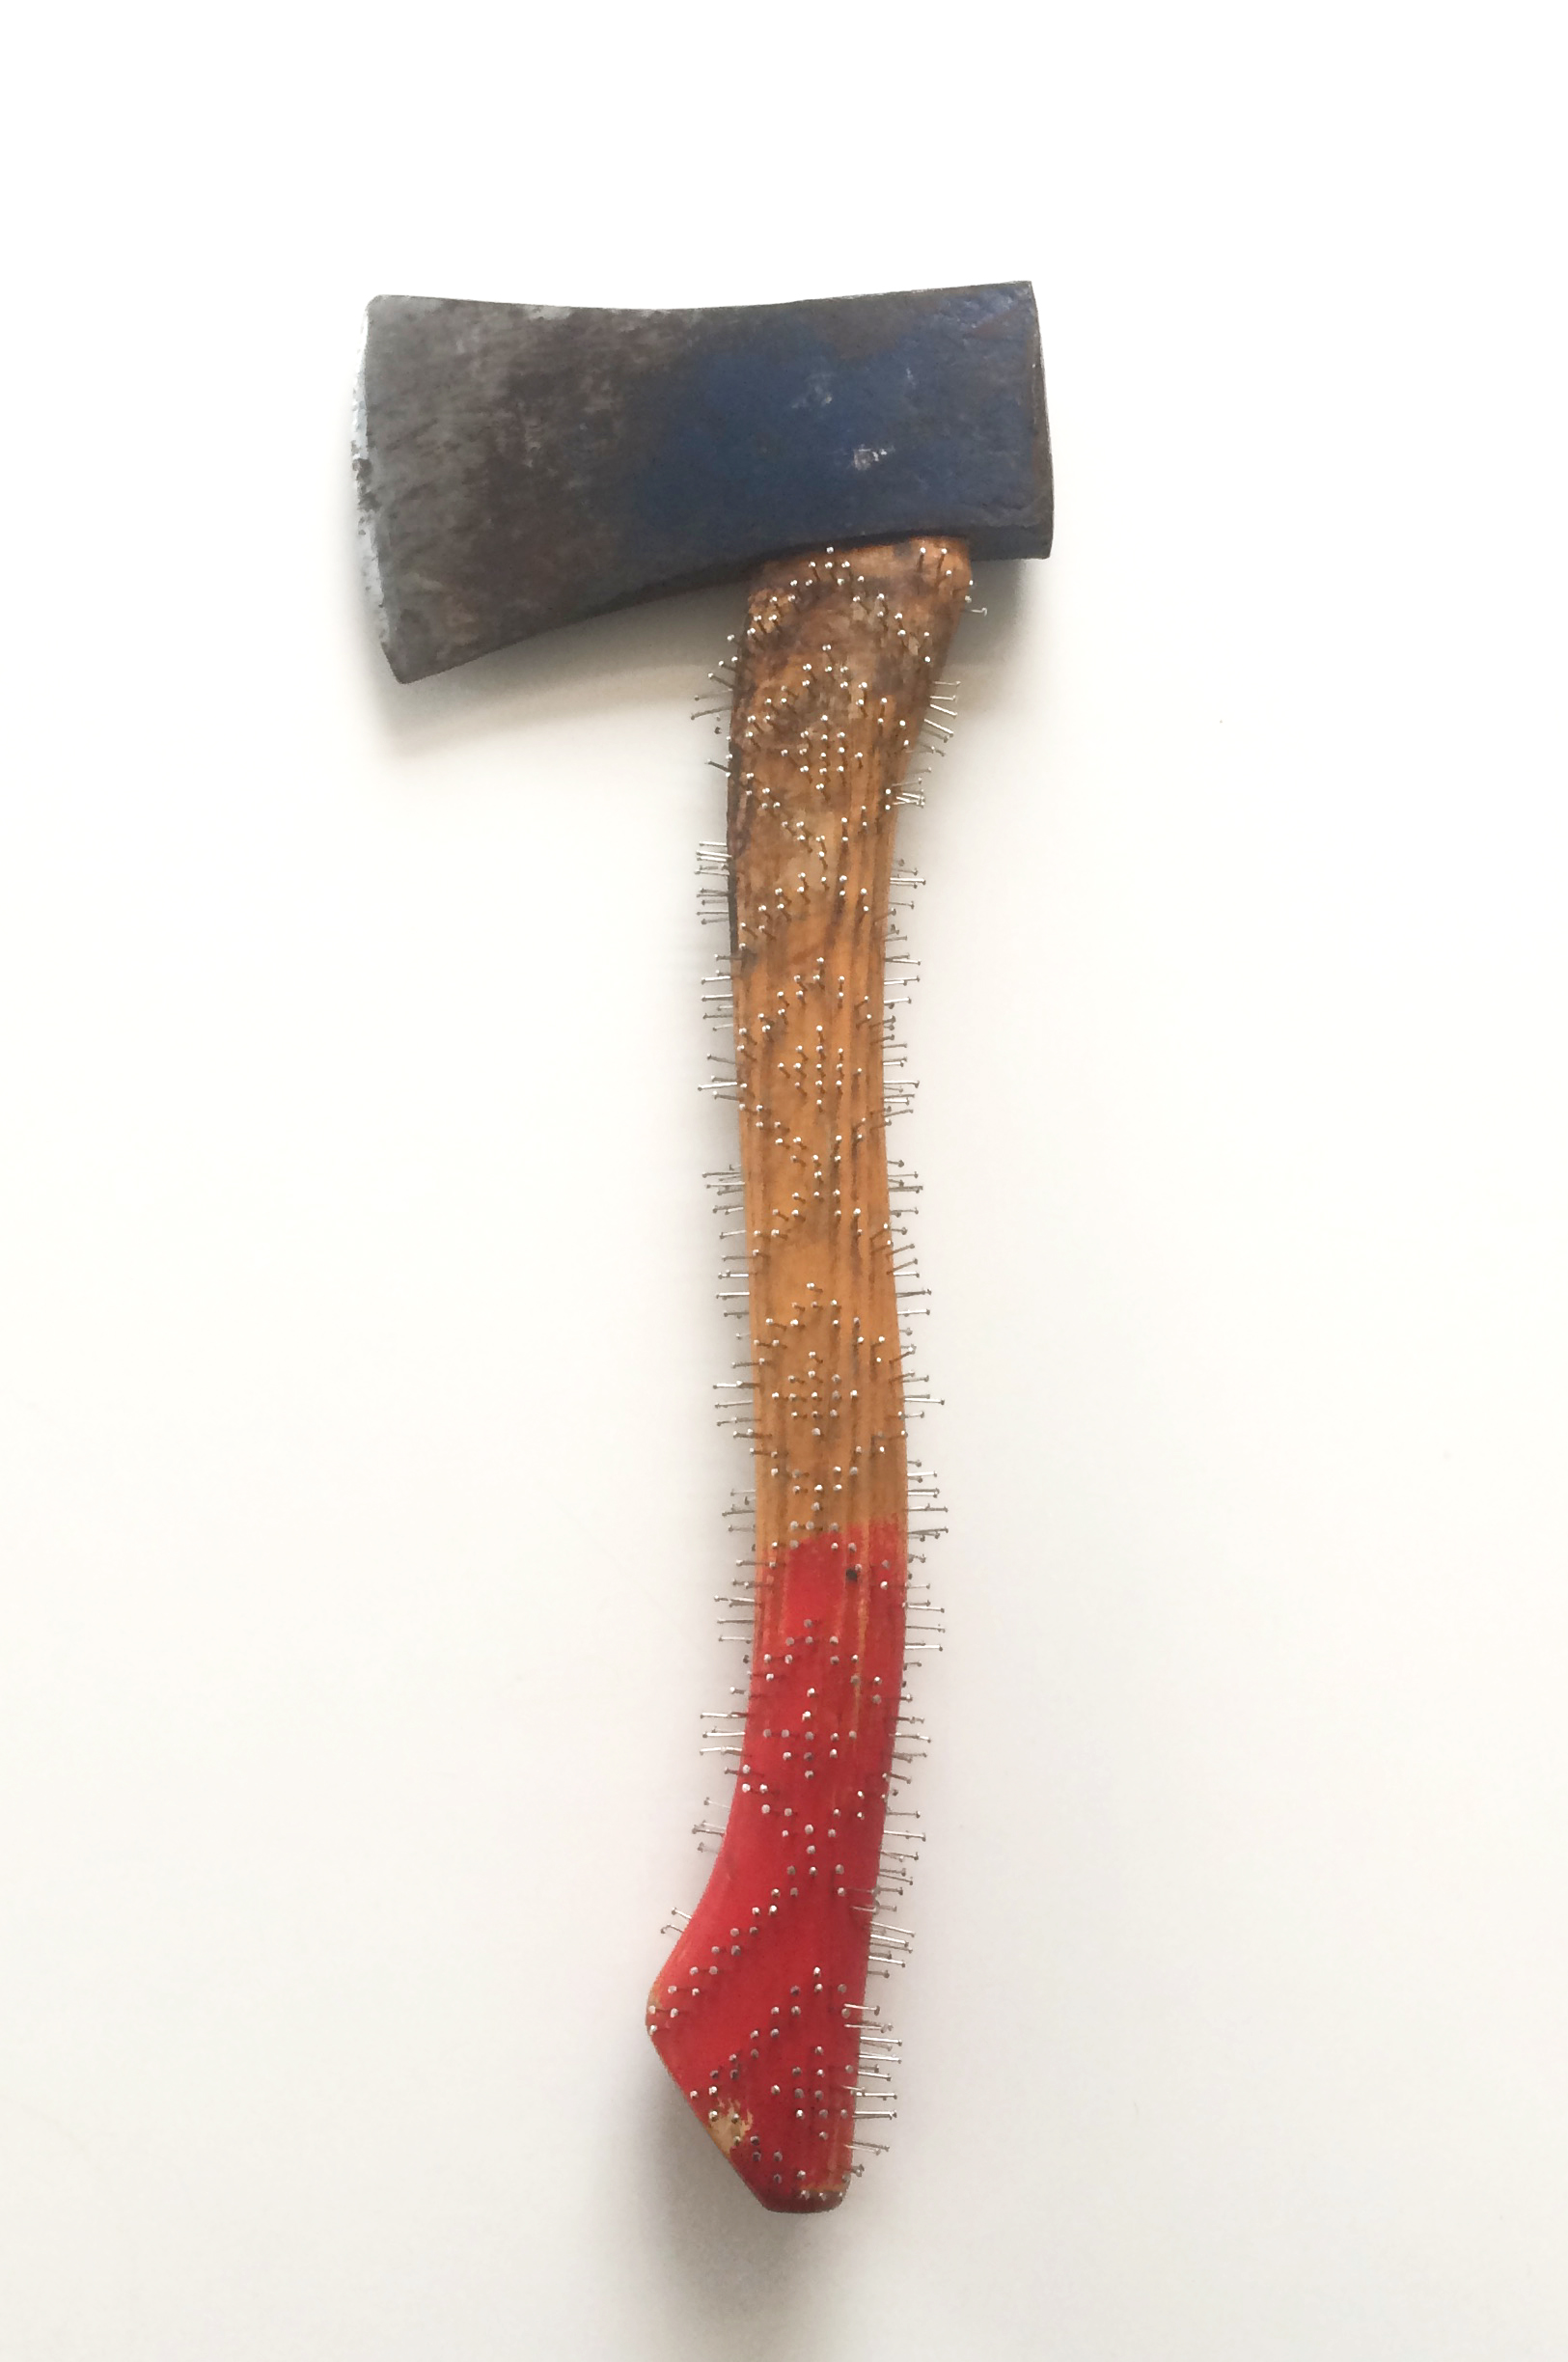   red end  2018   found axe, pins 13 x 19 inches 